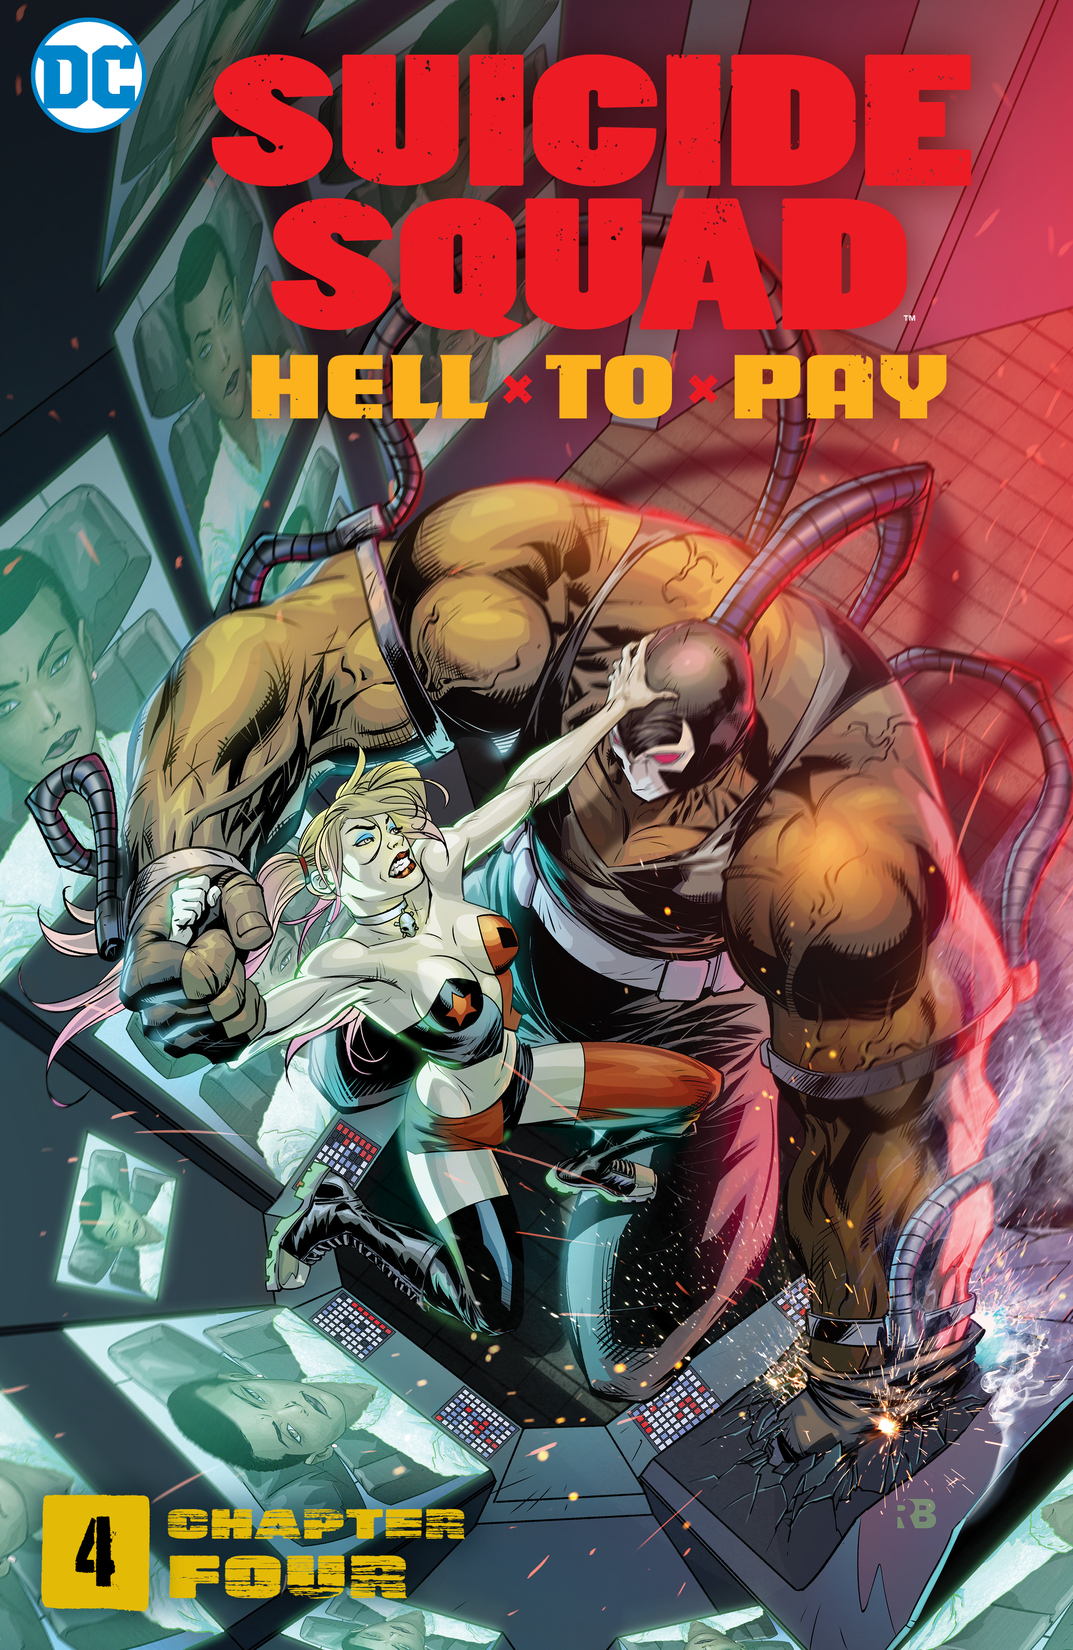 Suicide Squad: Hell to Pay #4 preview images